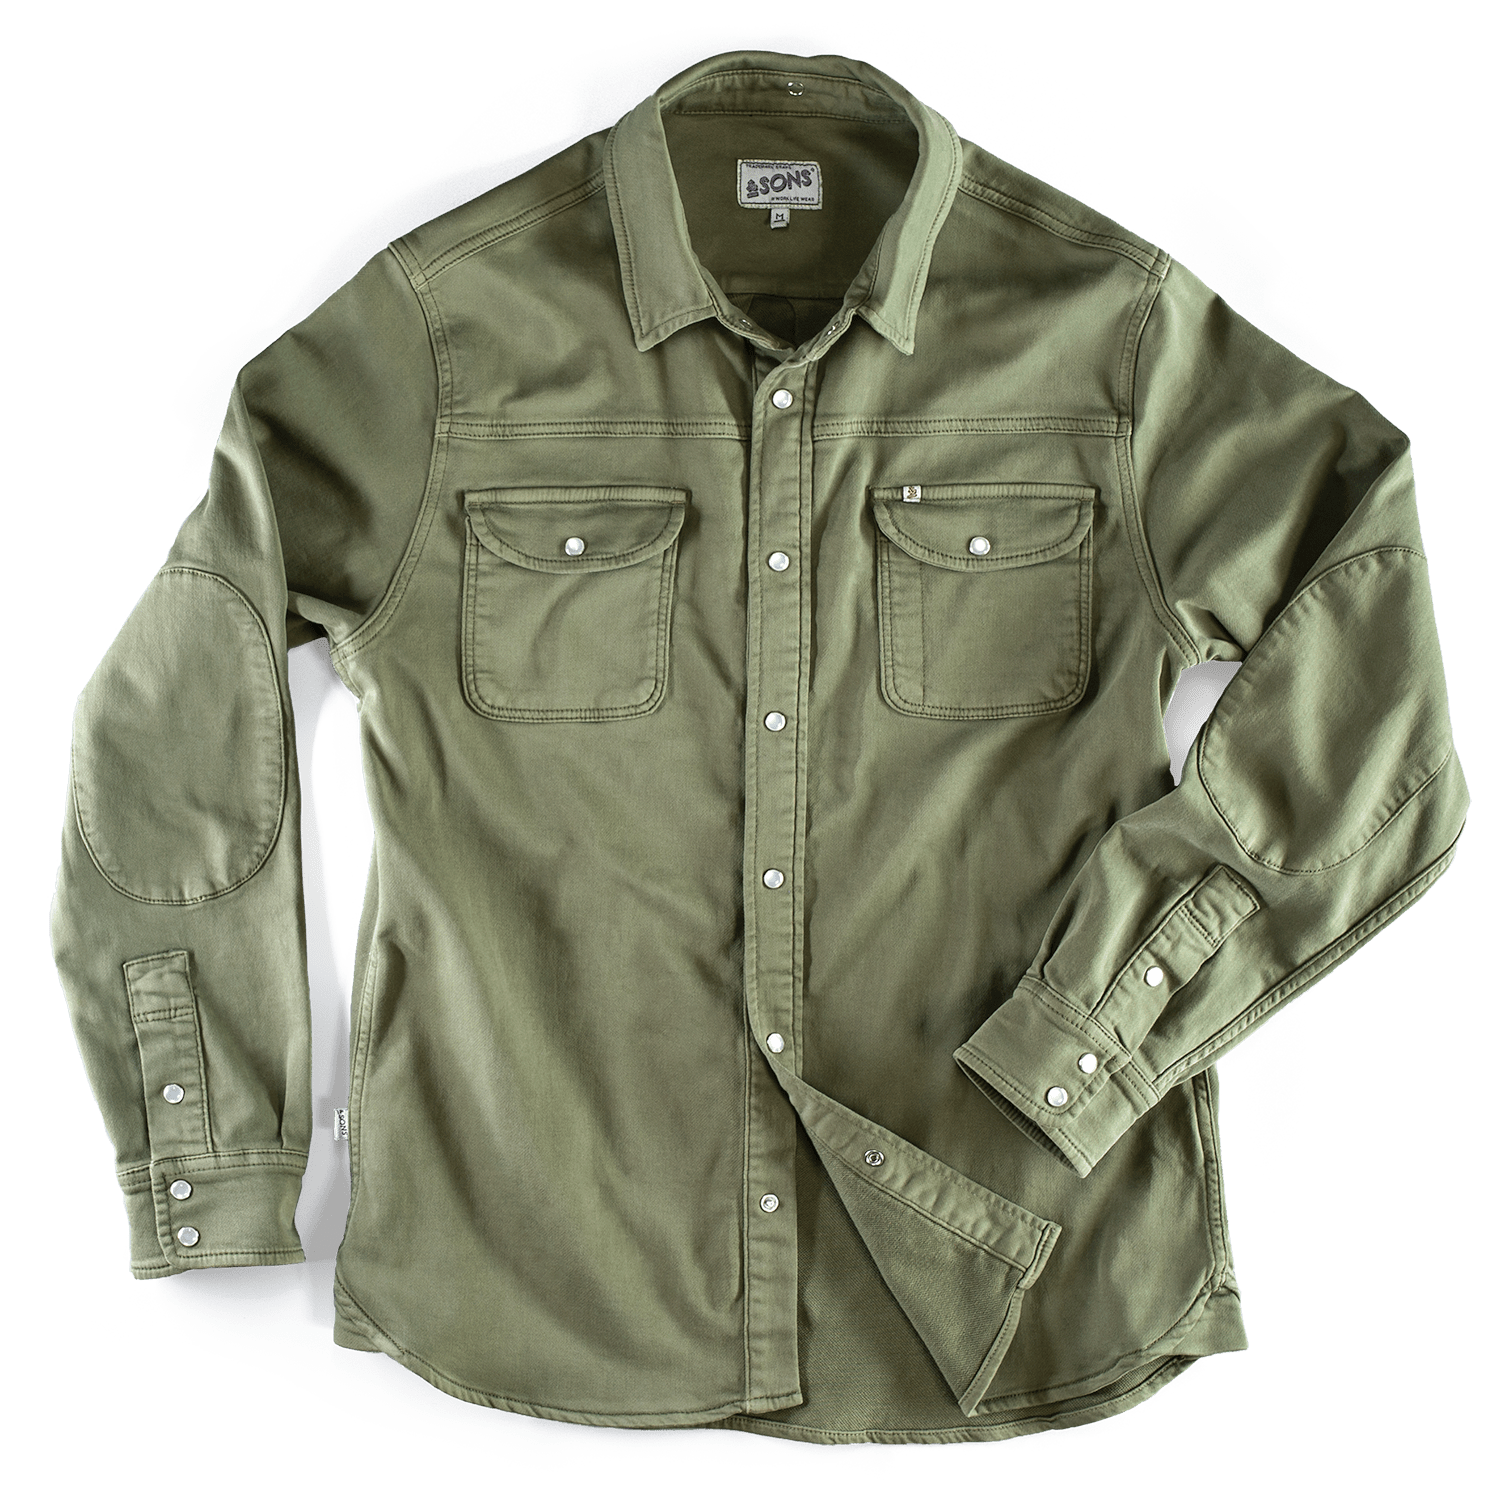 Men's Sunday Shirt Army Green 2 Small &SONS Trading Co